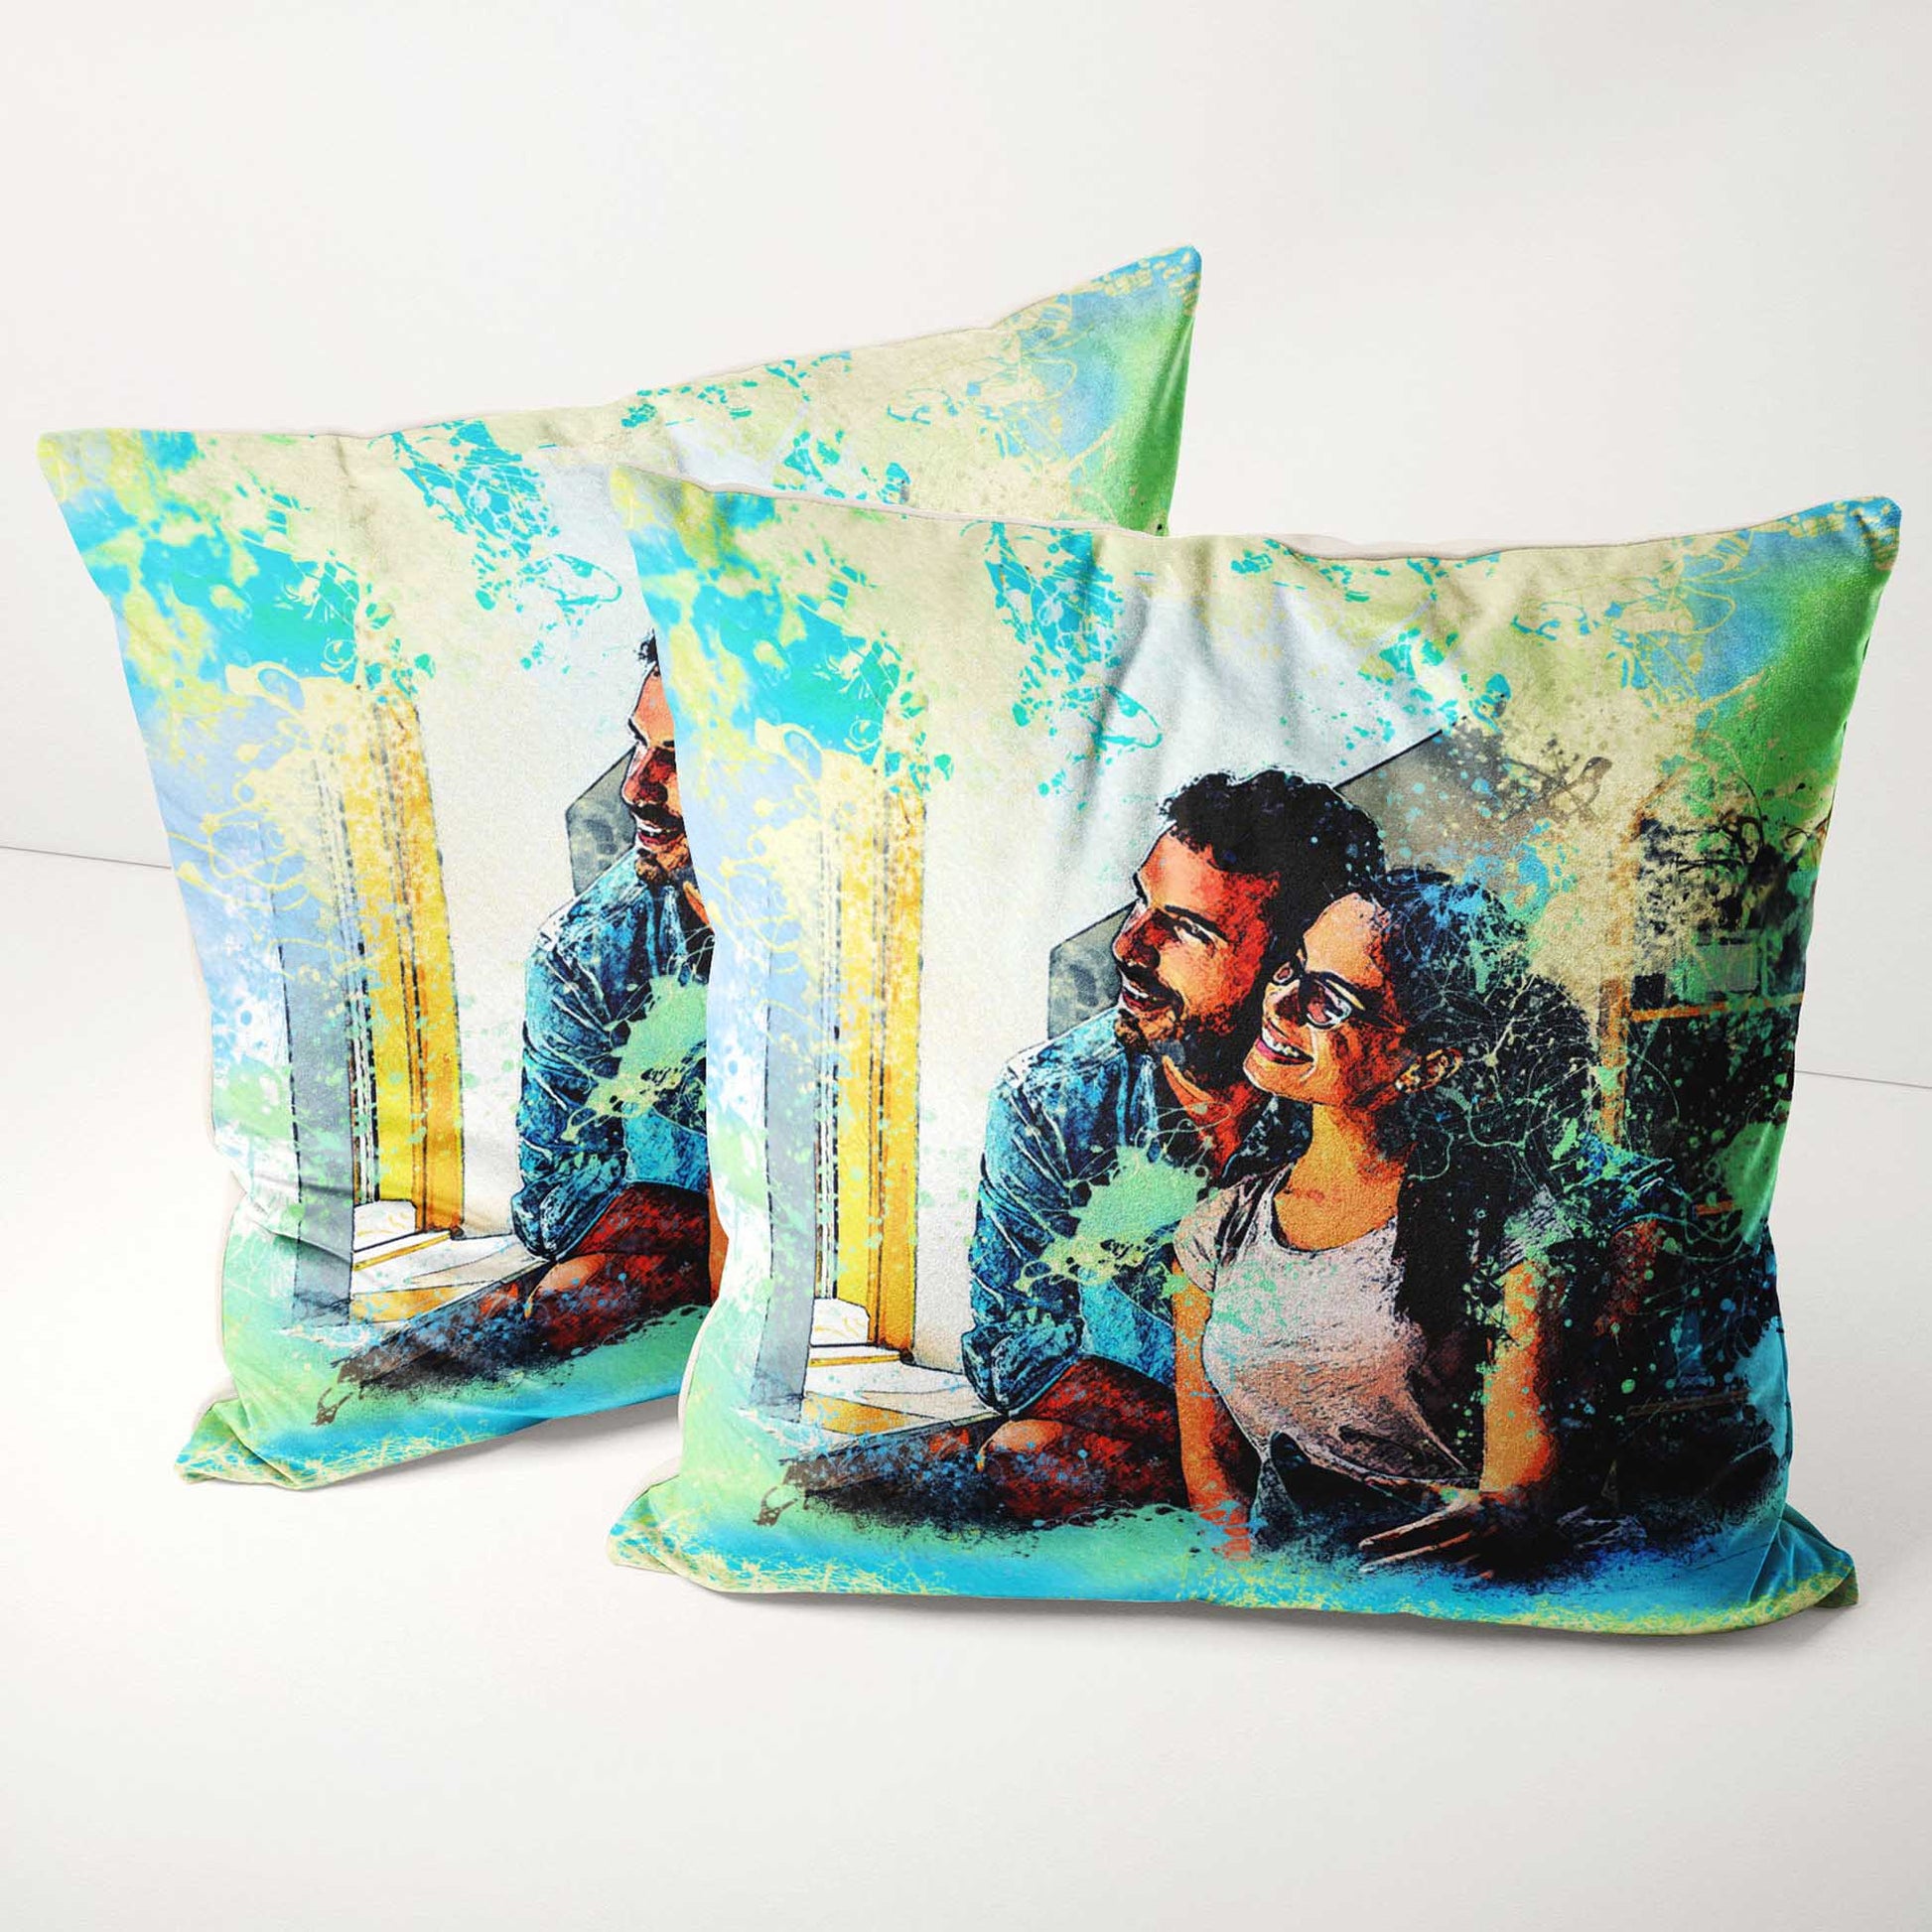 Bring your ideas to life with the Personalised Watercolor Splash Cushion. Its cosy and relaxing nature invites you to unwind and enjoy. The vibrant and unique watercolor splash design adds an exciting and creative touch to your interior